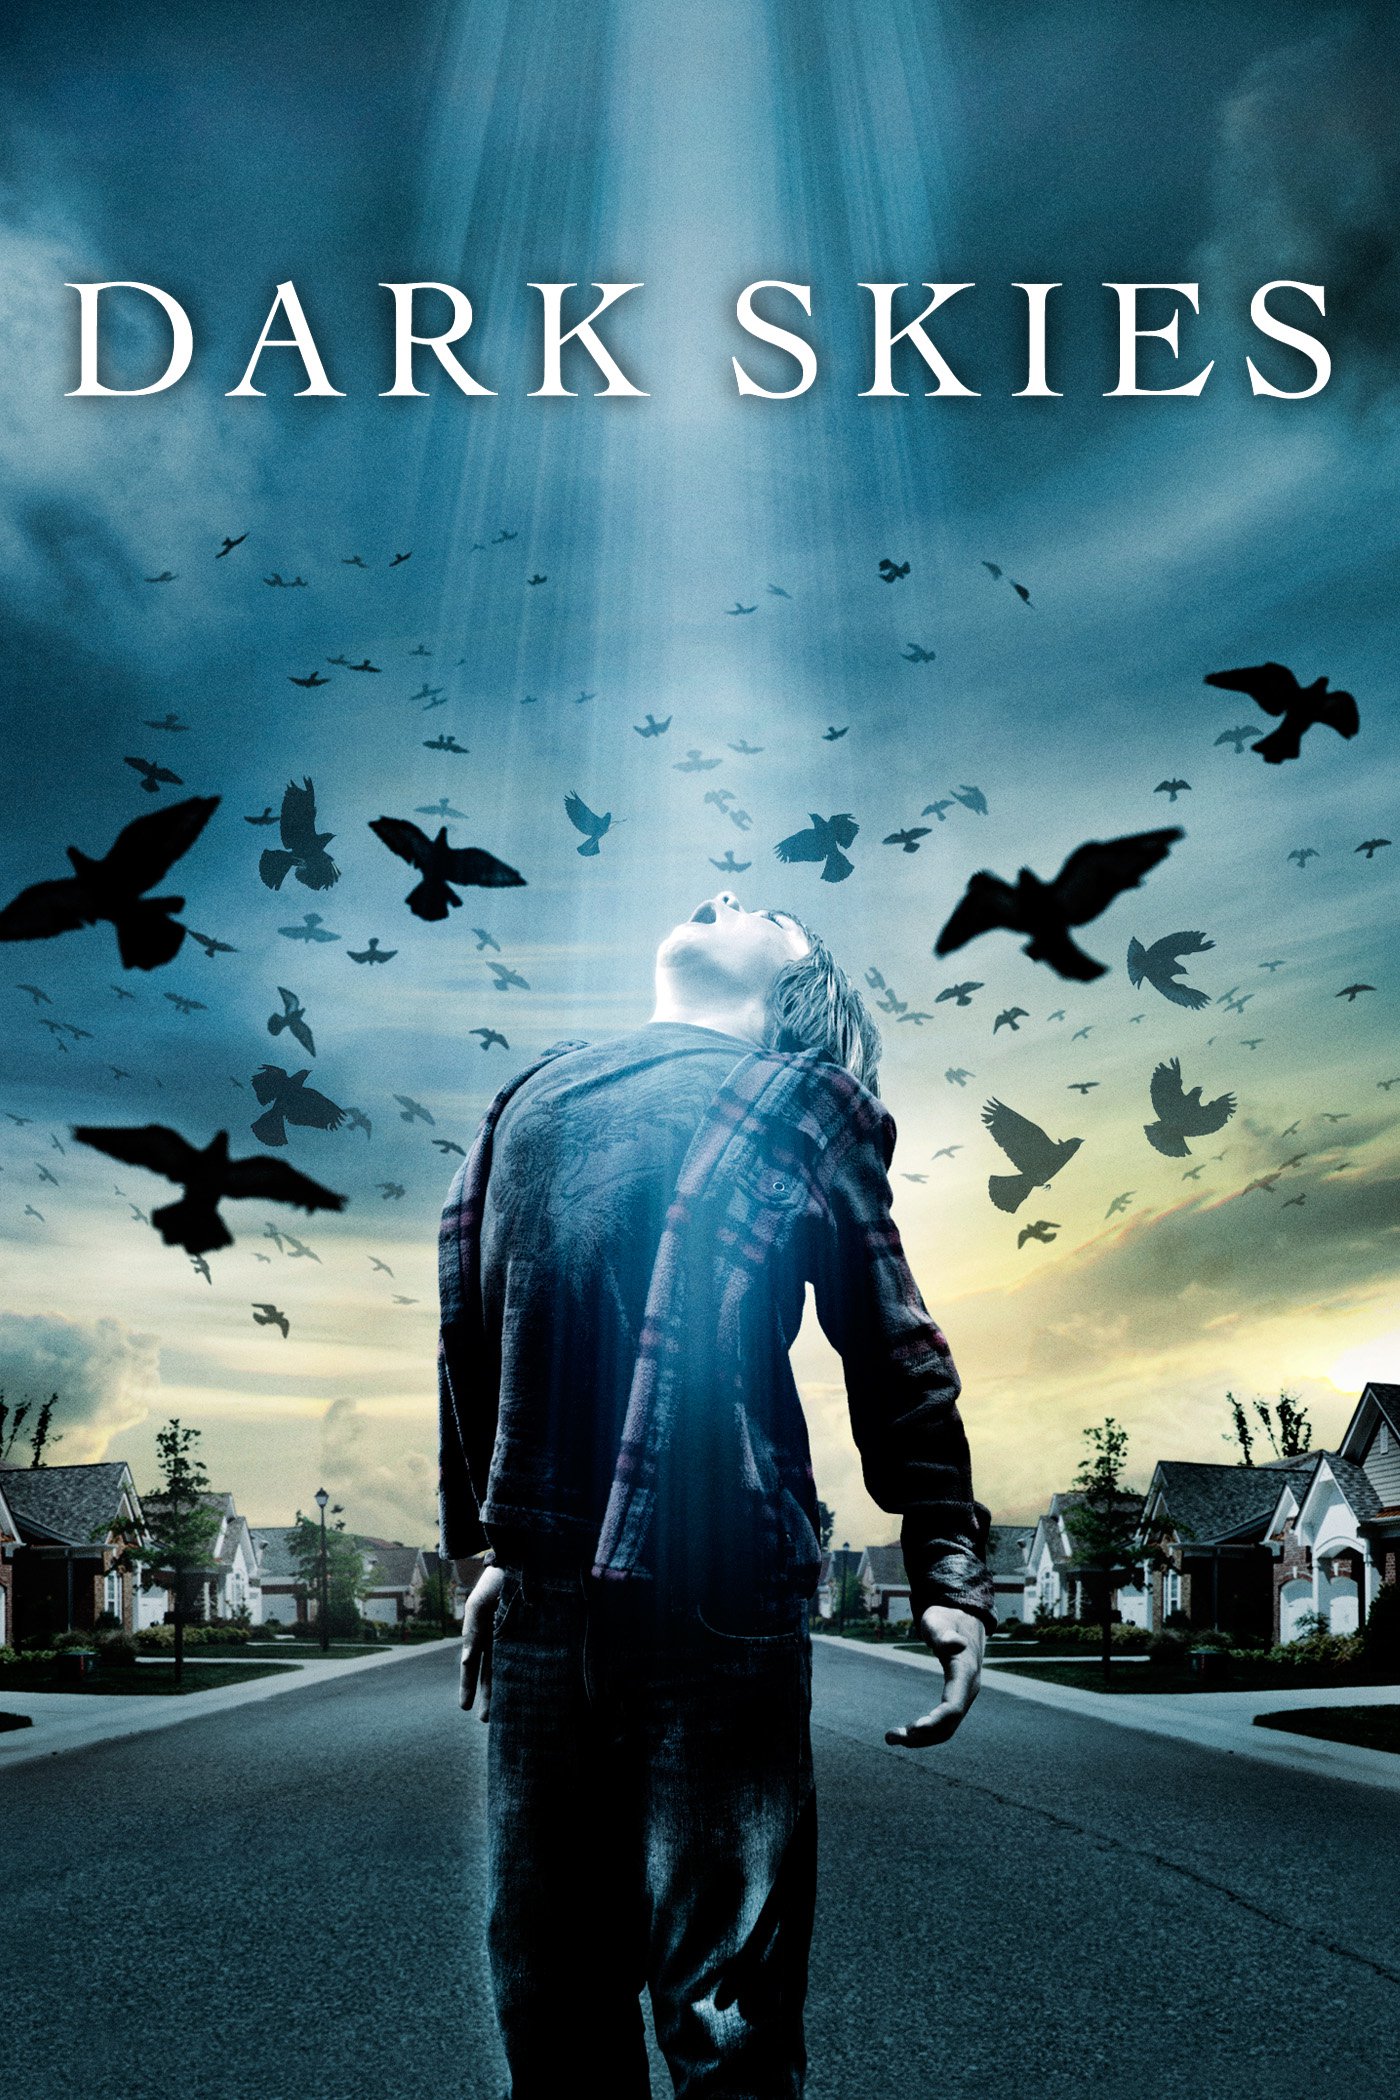 Poster for the movie "Dark Skies"